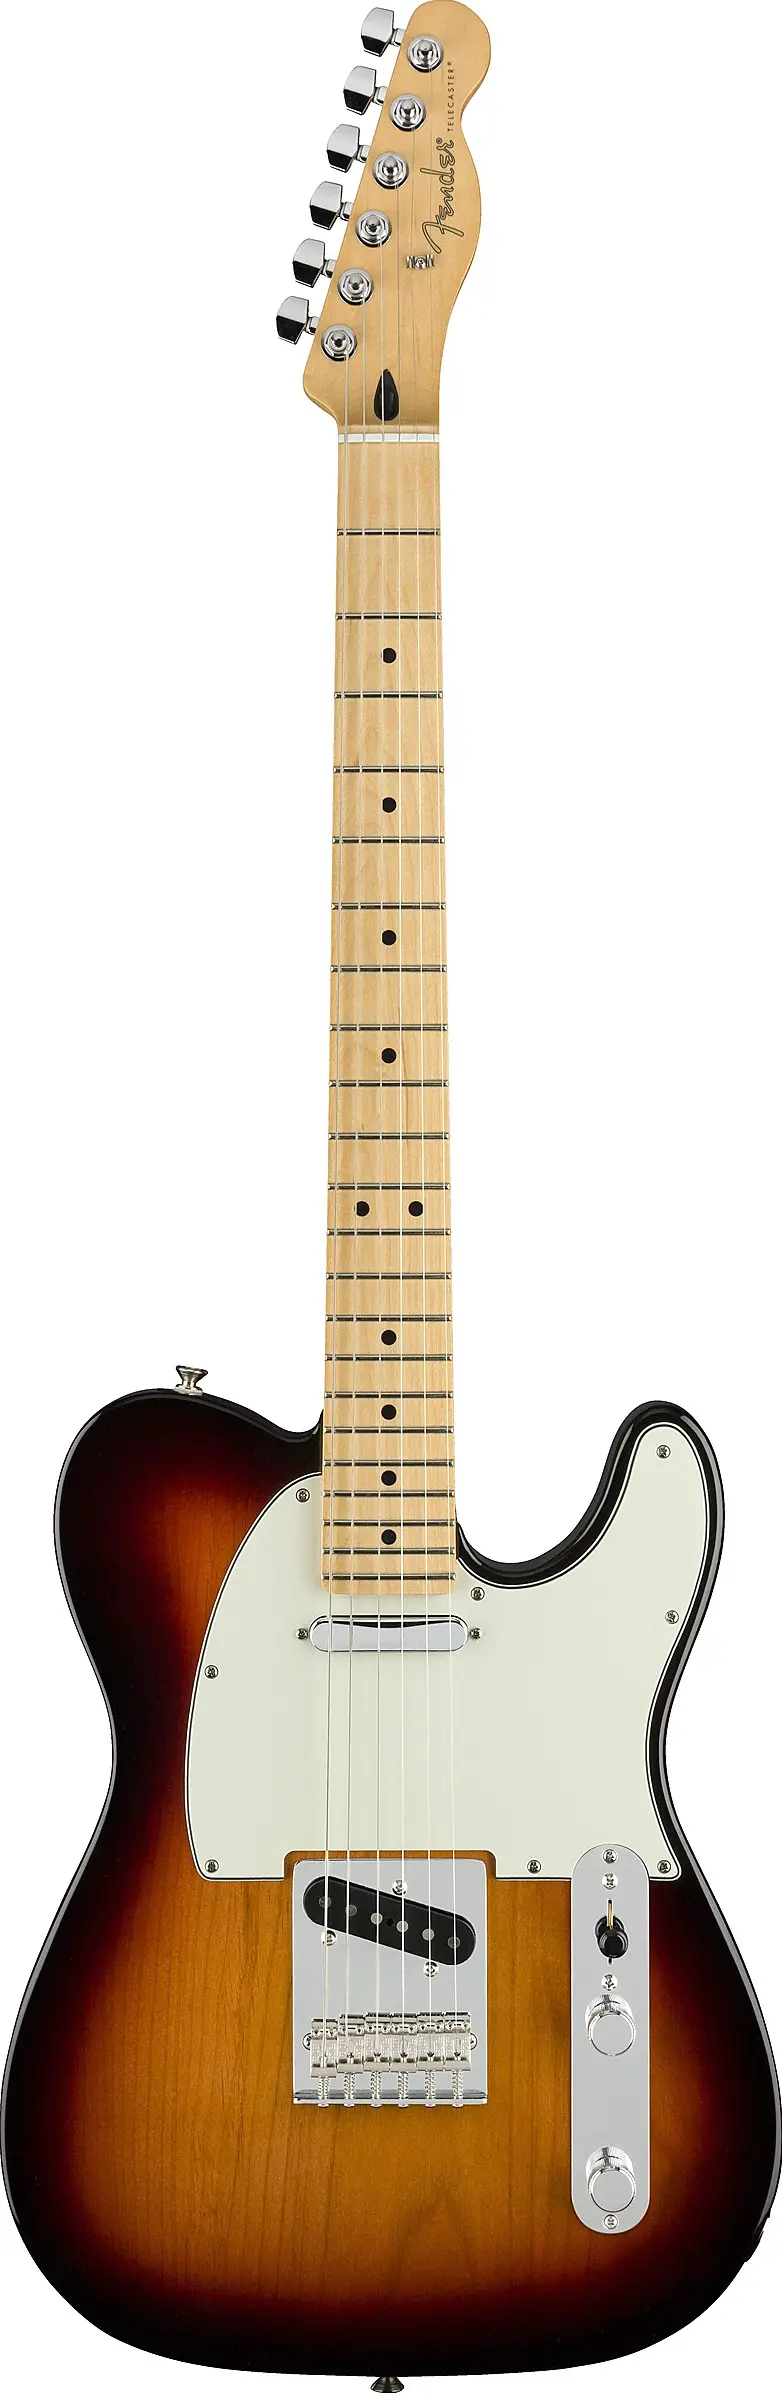 Player Telecaster by Fender